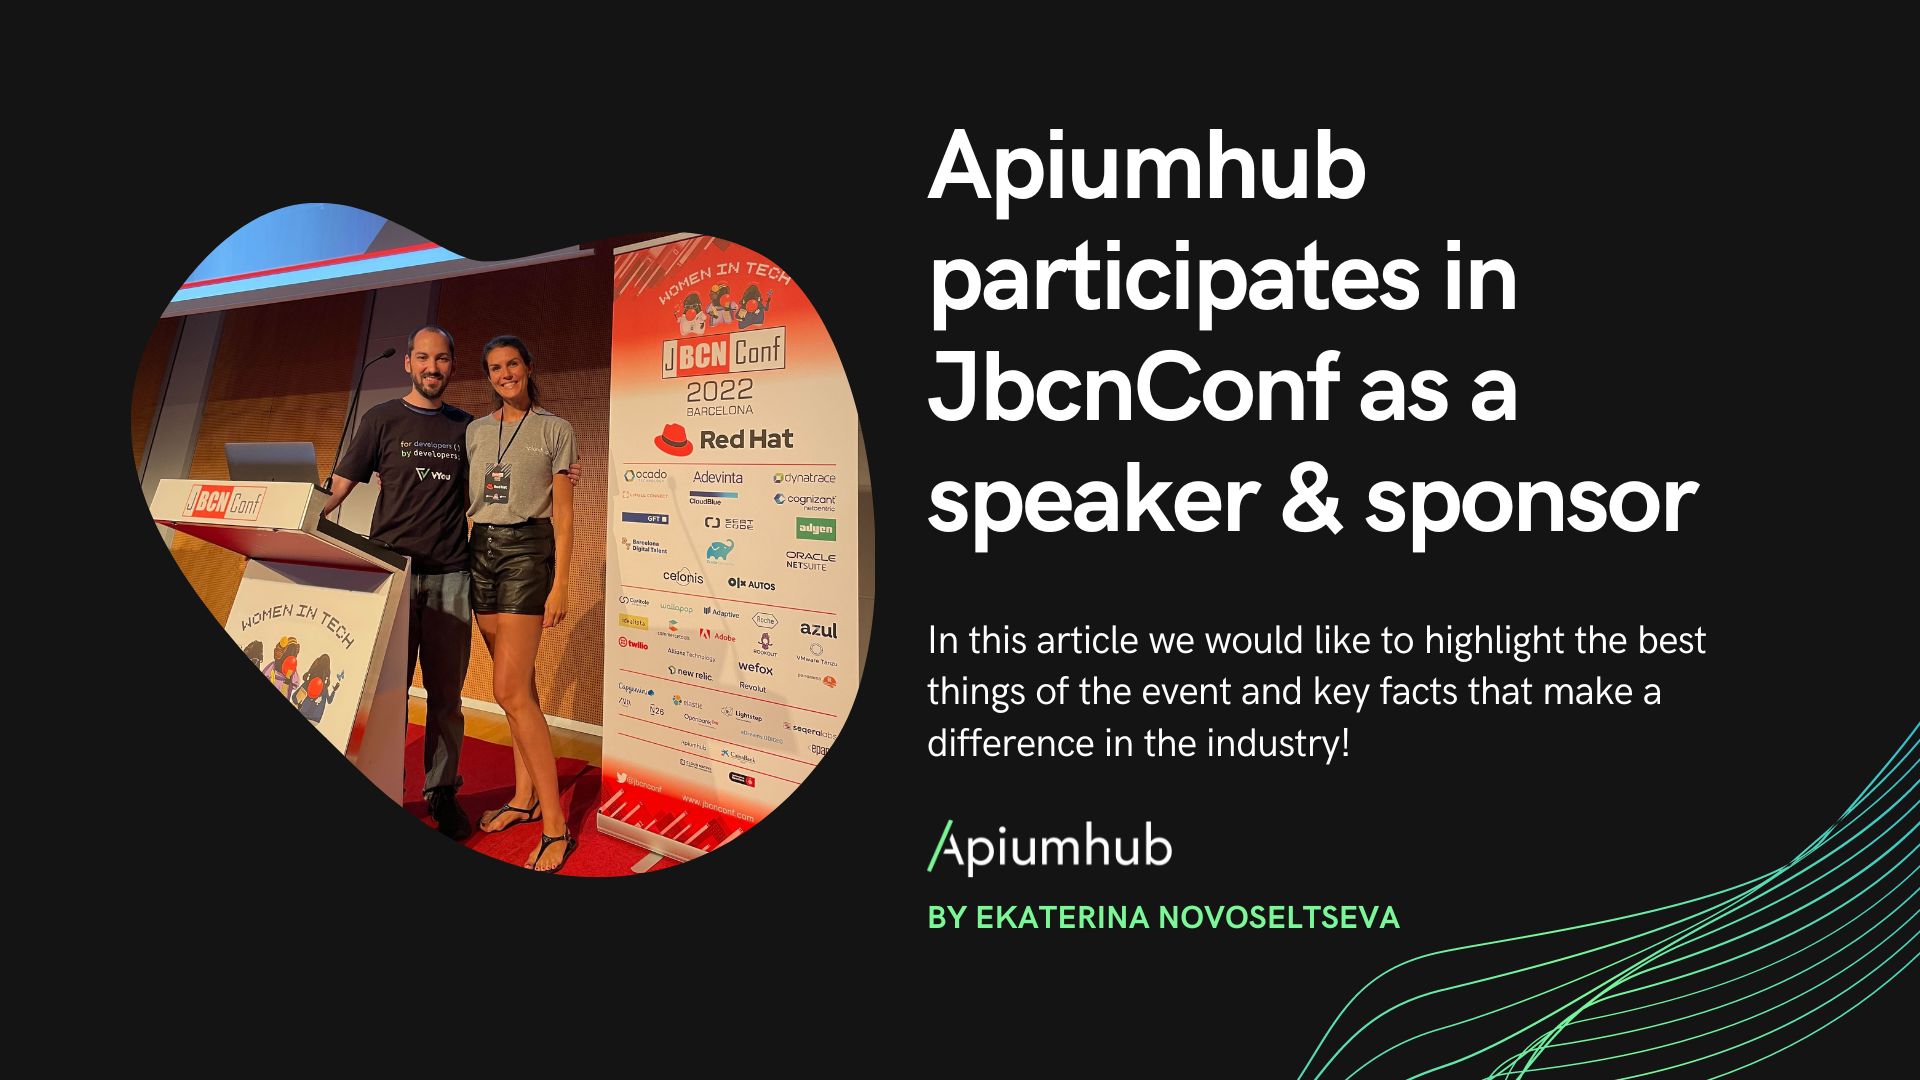 Apiumhub participates in JbcnConf as a speaker and sponsor